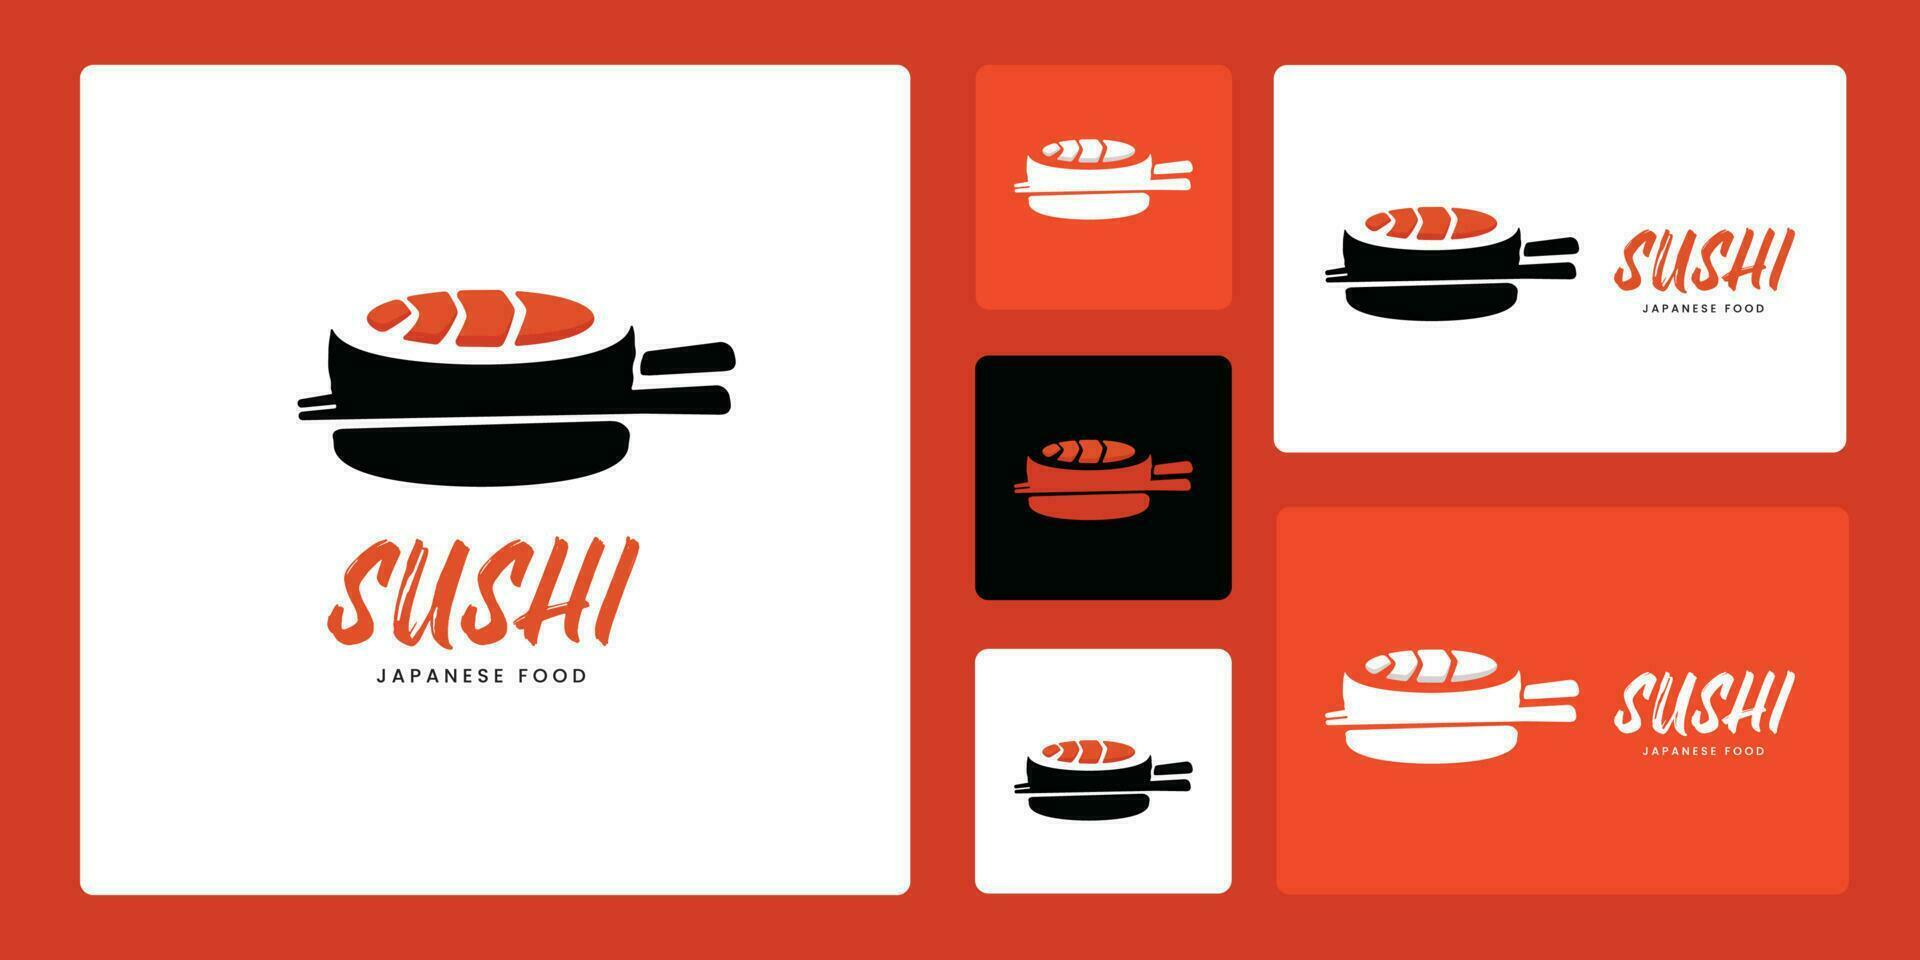 Set Sushi Logo Template For Japanese Food Restaurant With Red And Black Color Salmon Sushi Theme. Isolated on Pink Background. vector